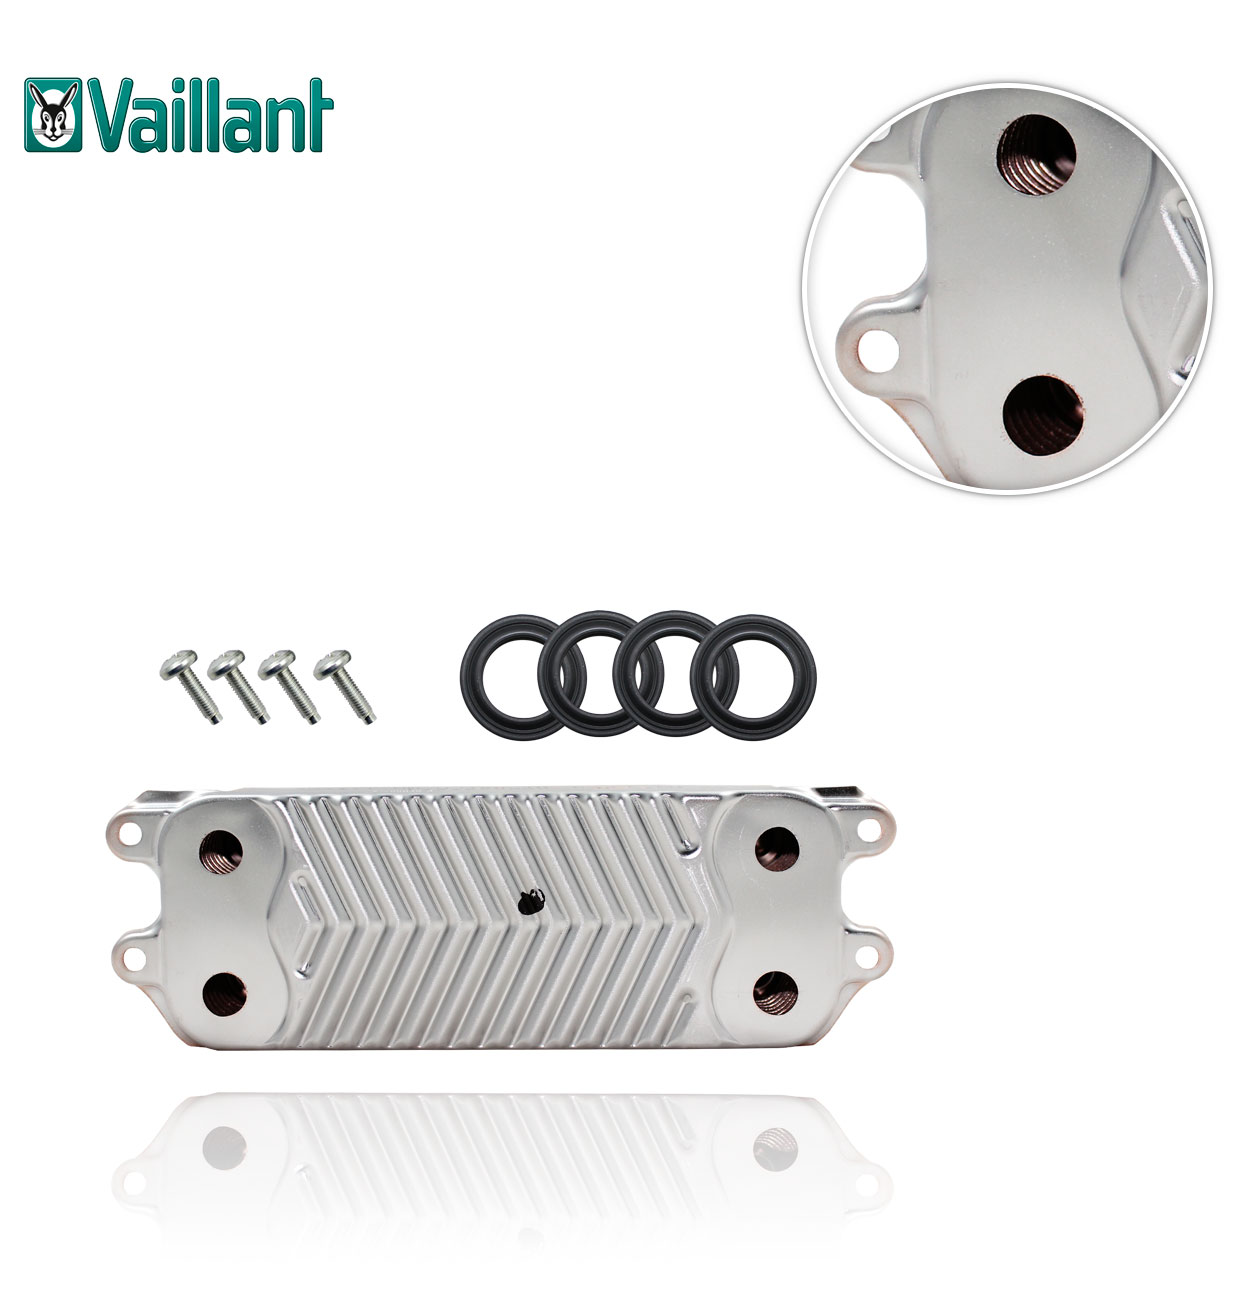 VAILLANT 0020038572 19 PLATE EXCHANGER